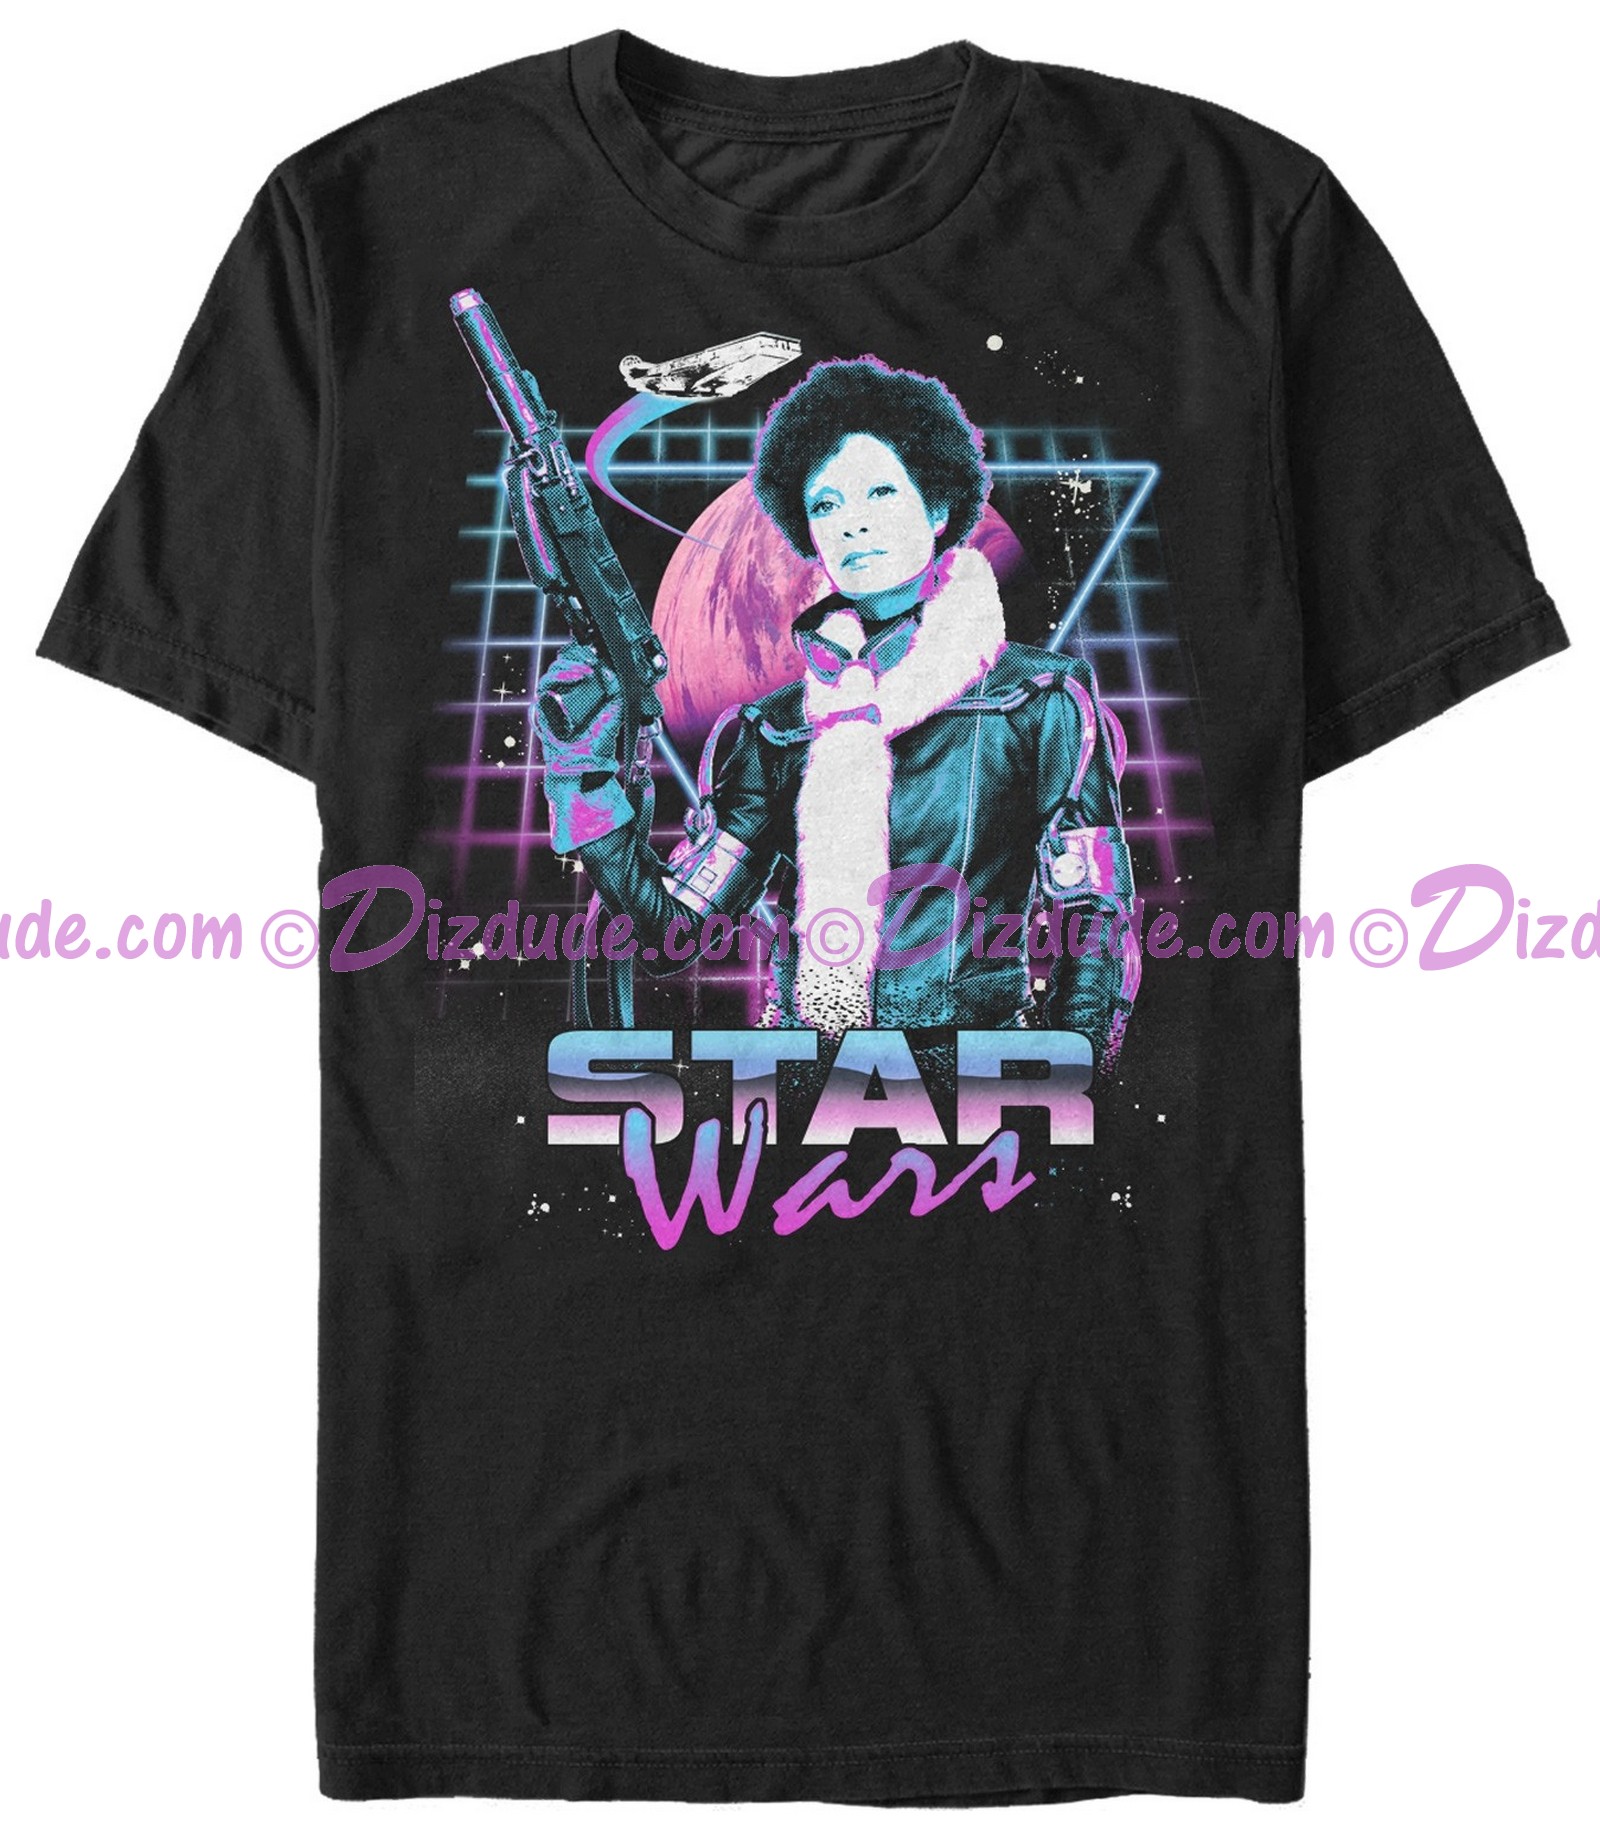 SOLO A Star Wars Story Val 80's Style Adult T-Shirt (Tshirt, T shirt or Tee)  © Dizdude.com